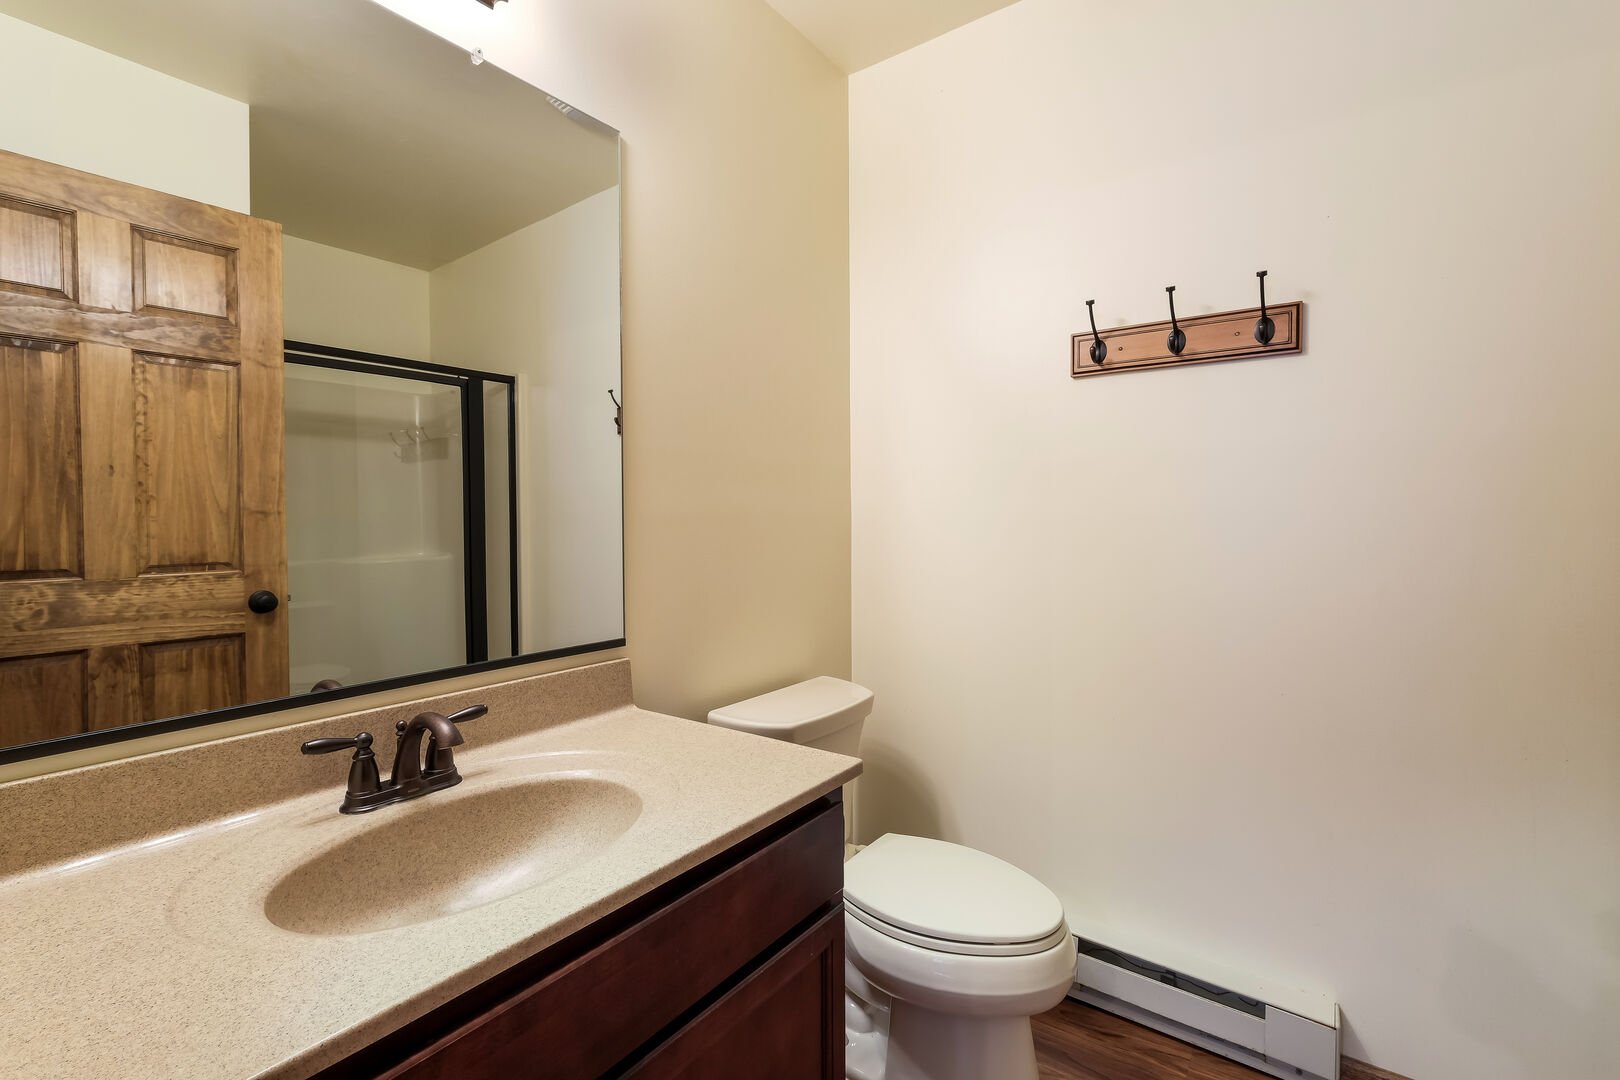 Toilet, sink, and mirror in a rental bathroom.